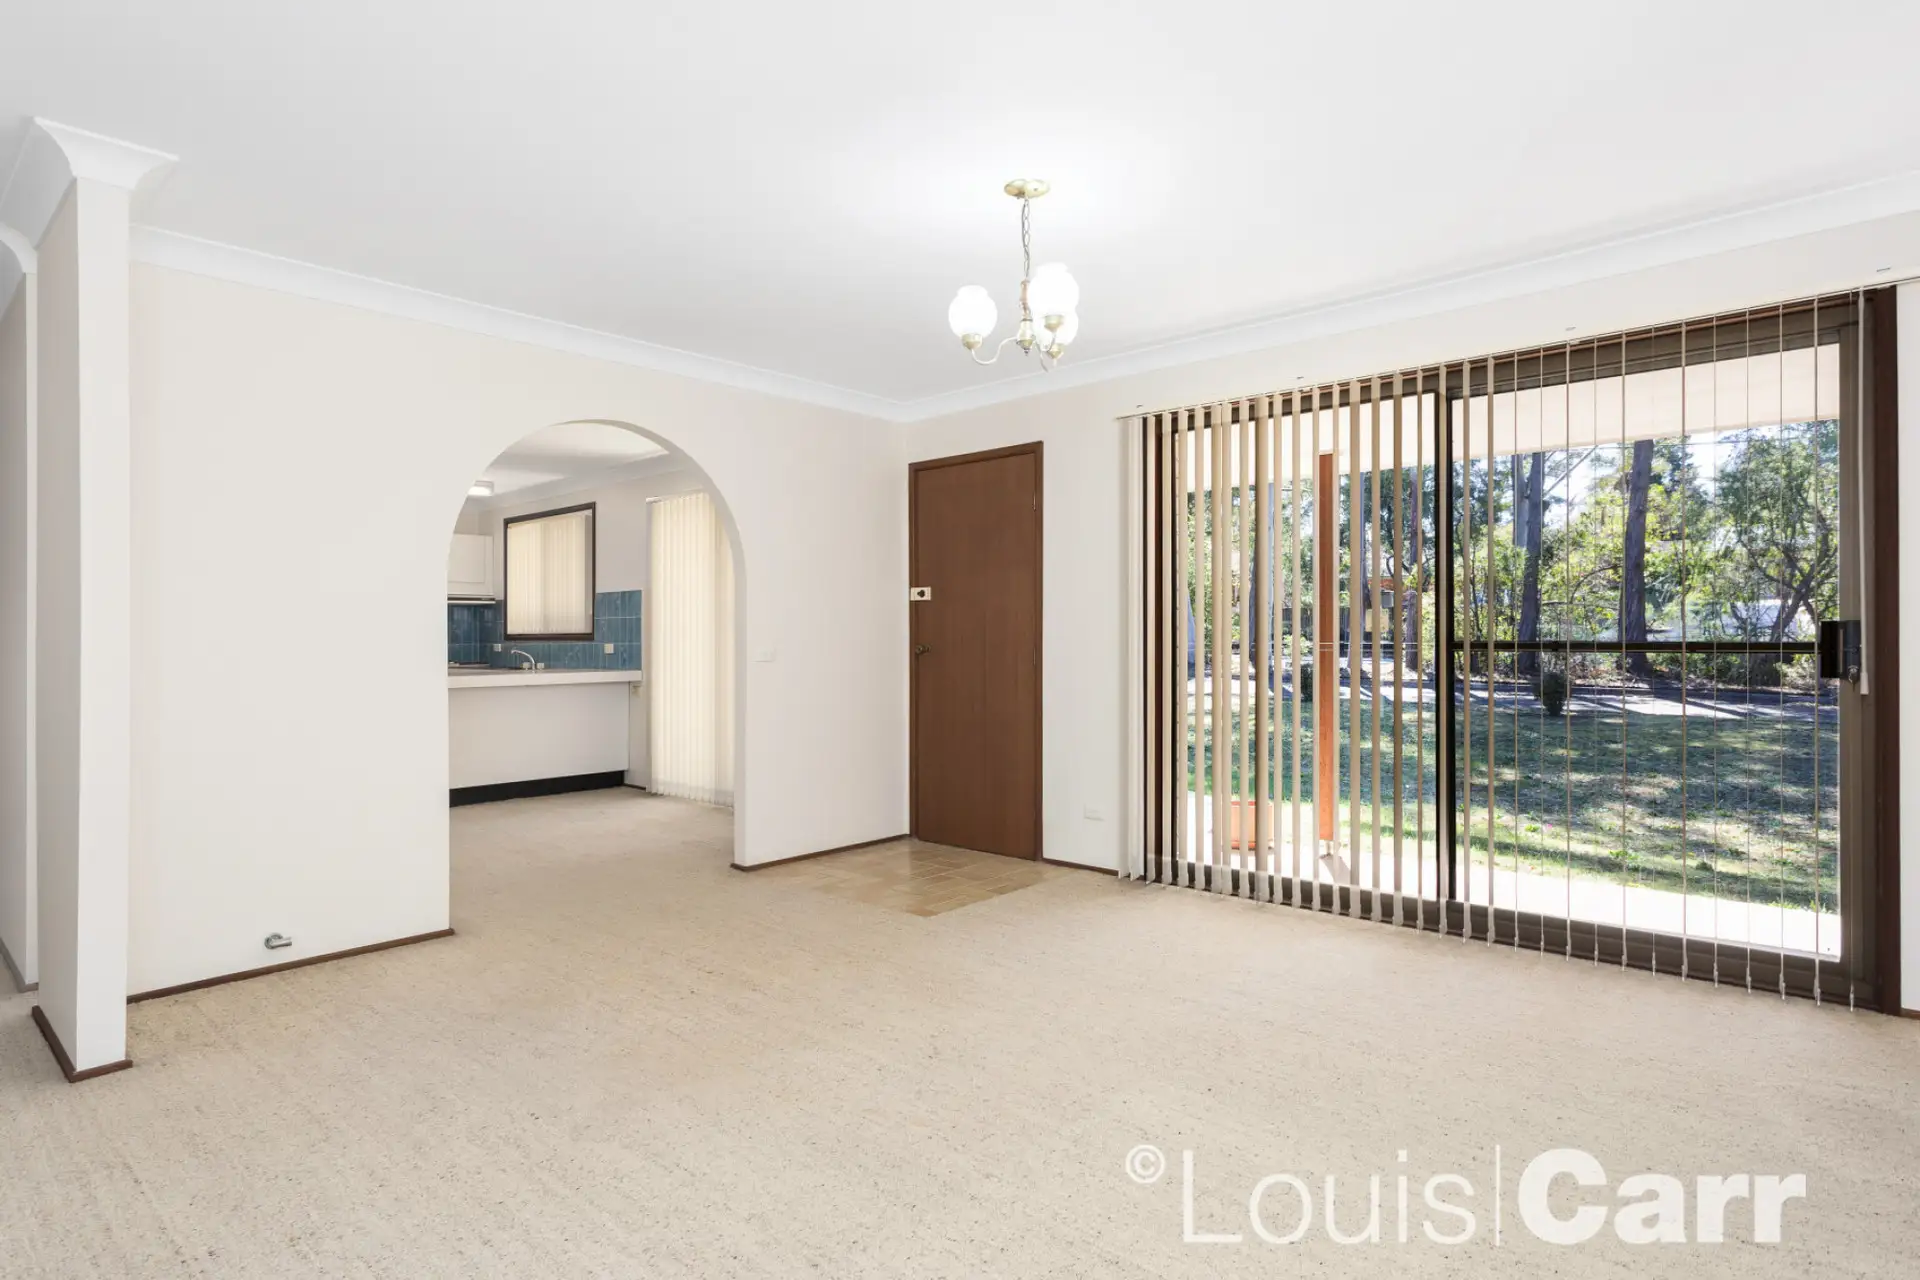 Photo #2: 78 Casuarina Drive, Cherrybrook - Sold by Louis Carr Real Estate